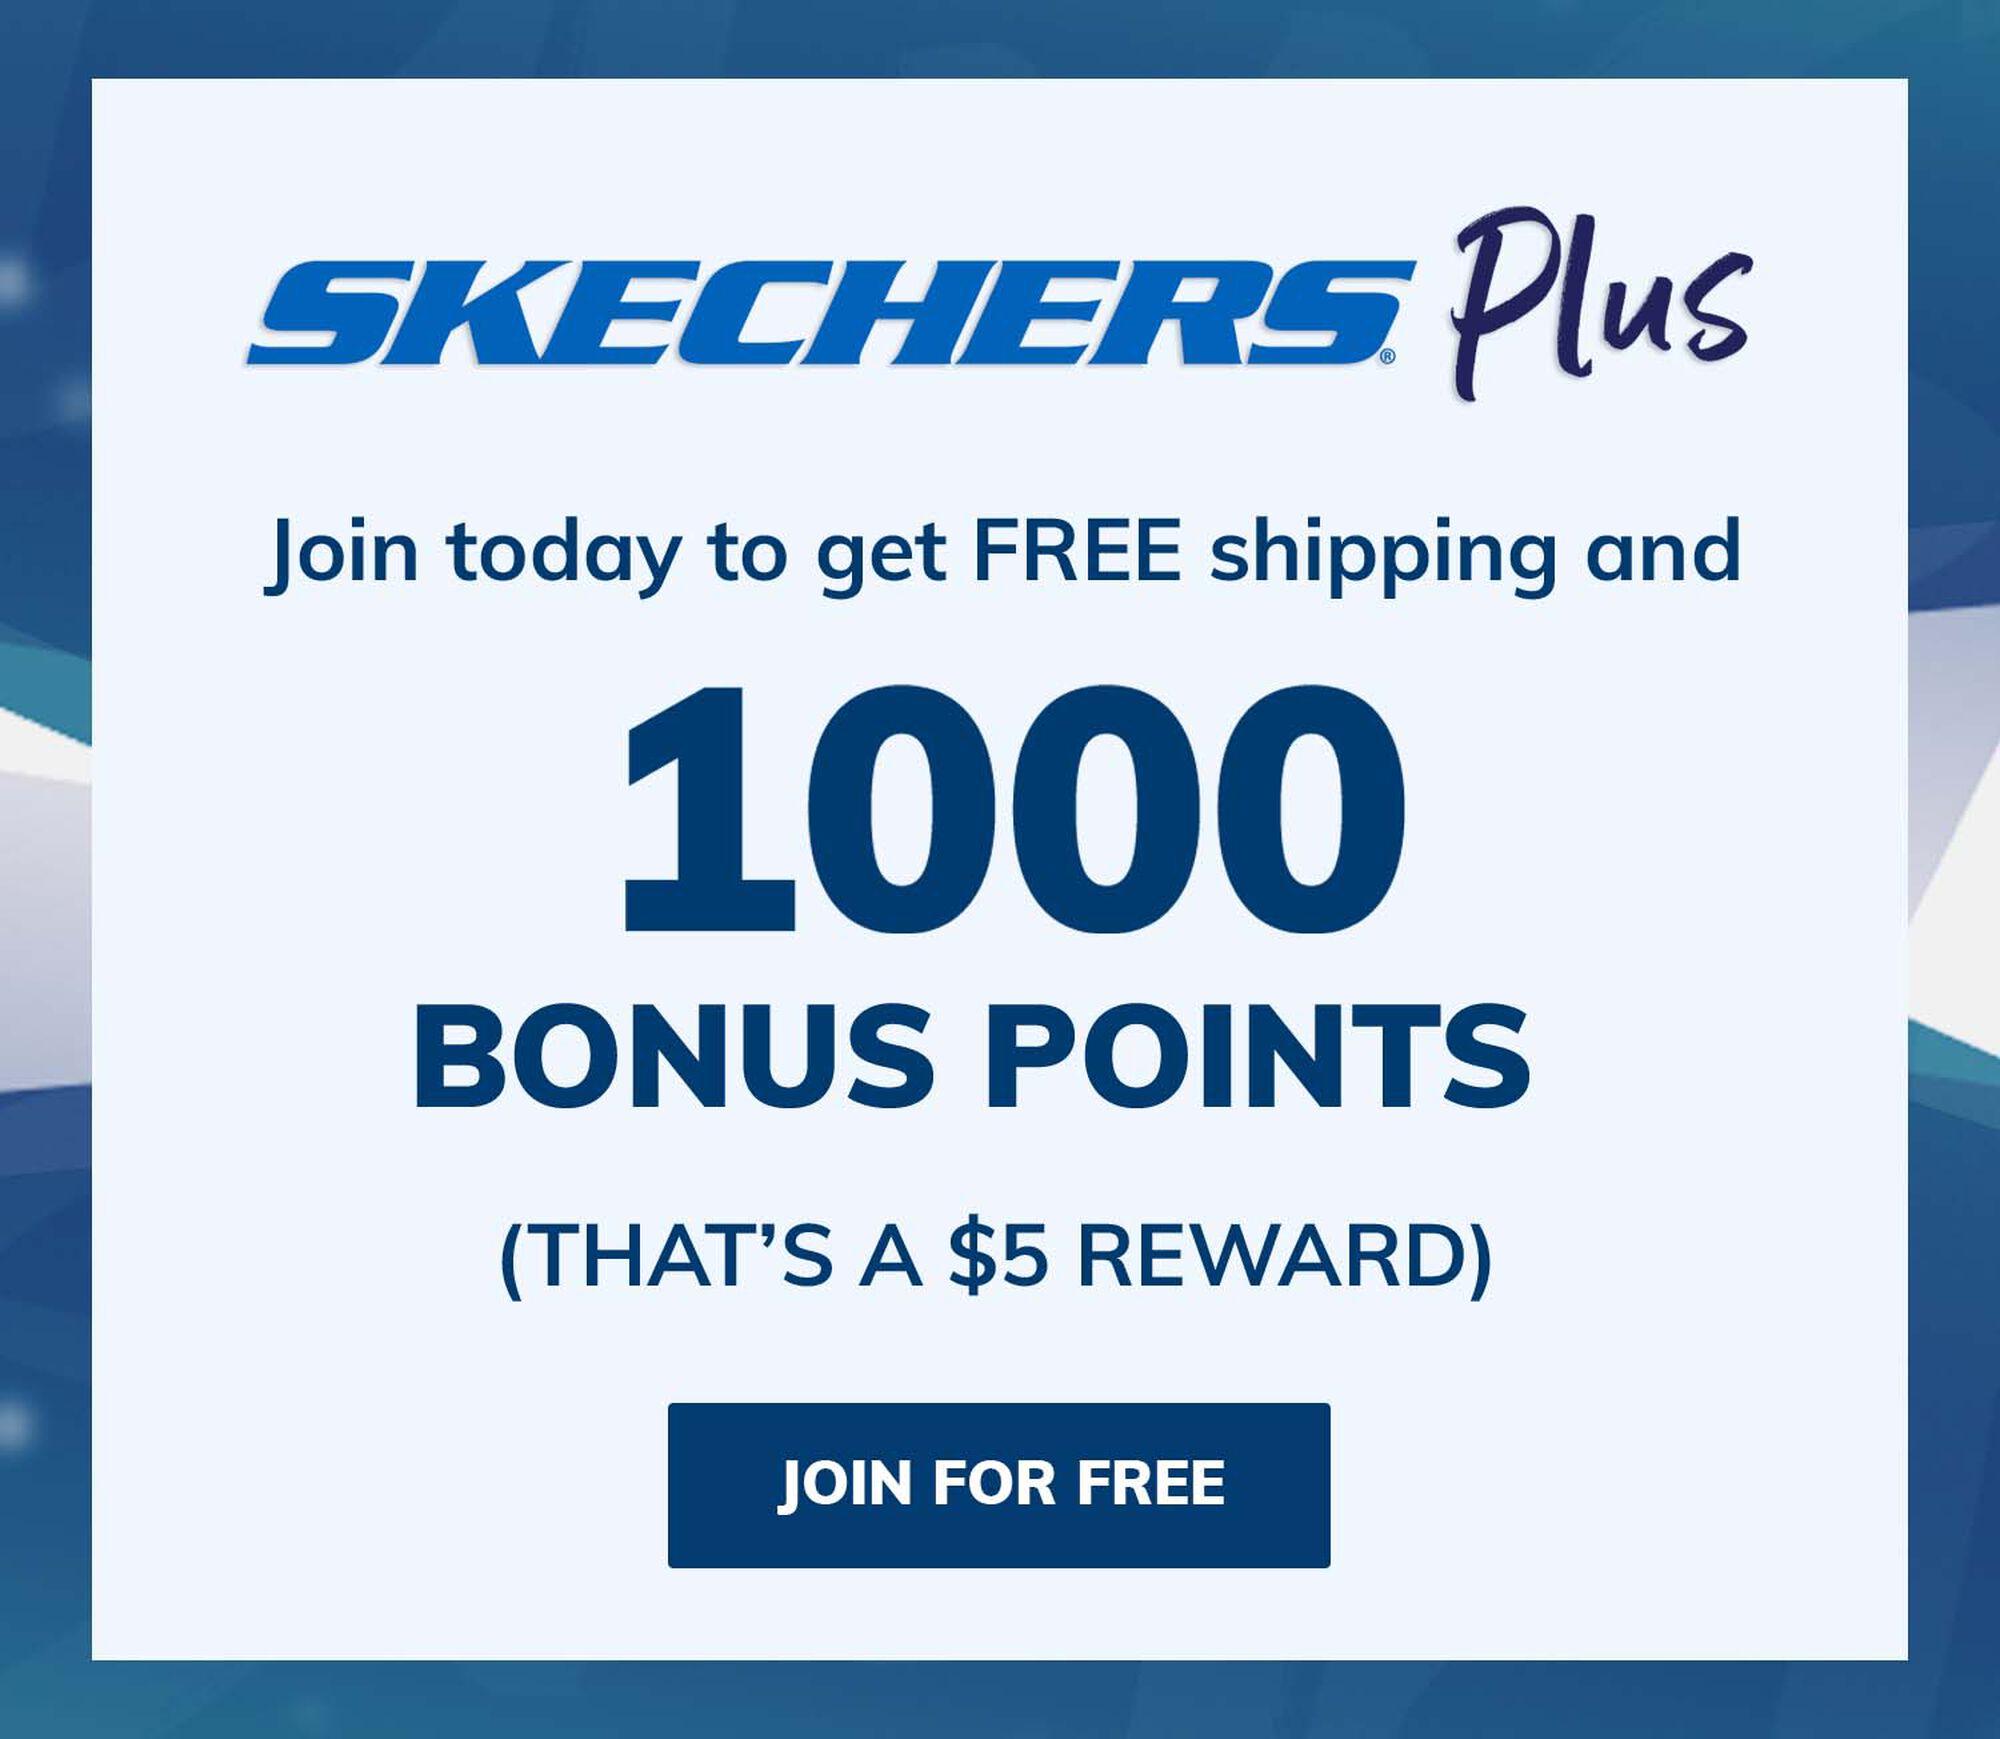 Official 25 Off Coupon, Promo Codes, Free Shipping SKECHERS